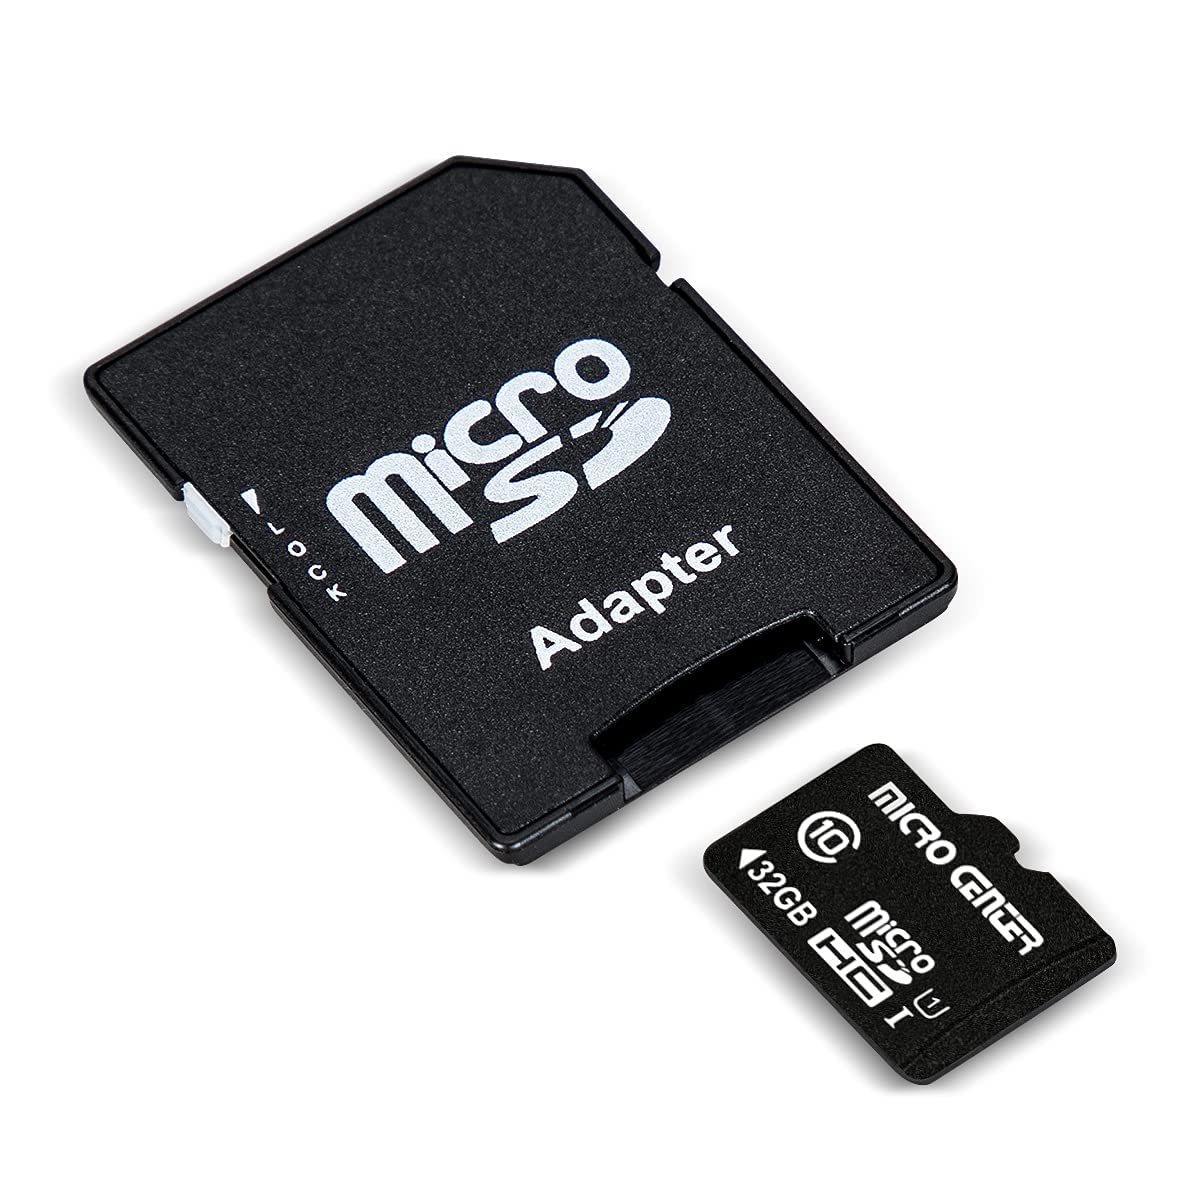 INLAND Micro Center 32GB Class 10 MicroSDHC Flash Memory Card with Adapter for Mobile Device Storage Phone, Tablet, Drone & Full HD Video Recording - 80MB/s UHS-I, C10, U1 (2 Pack)